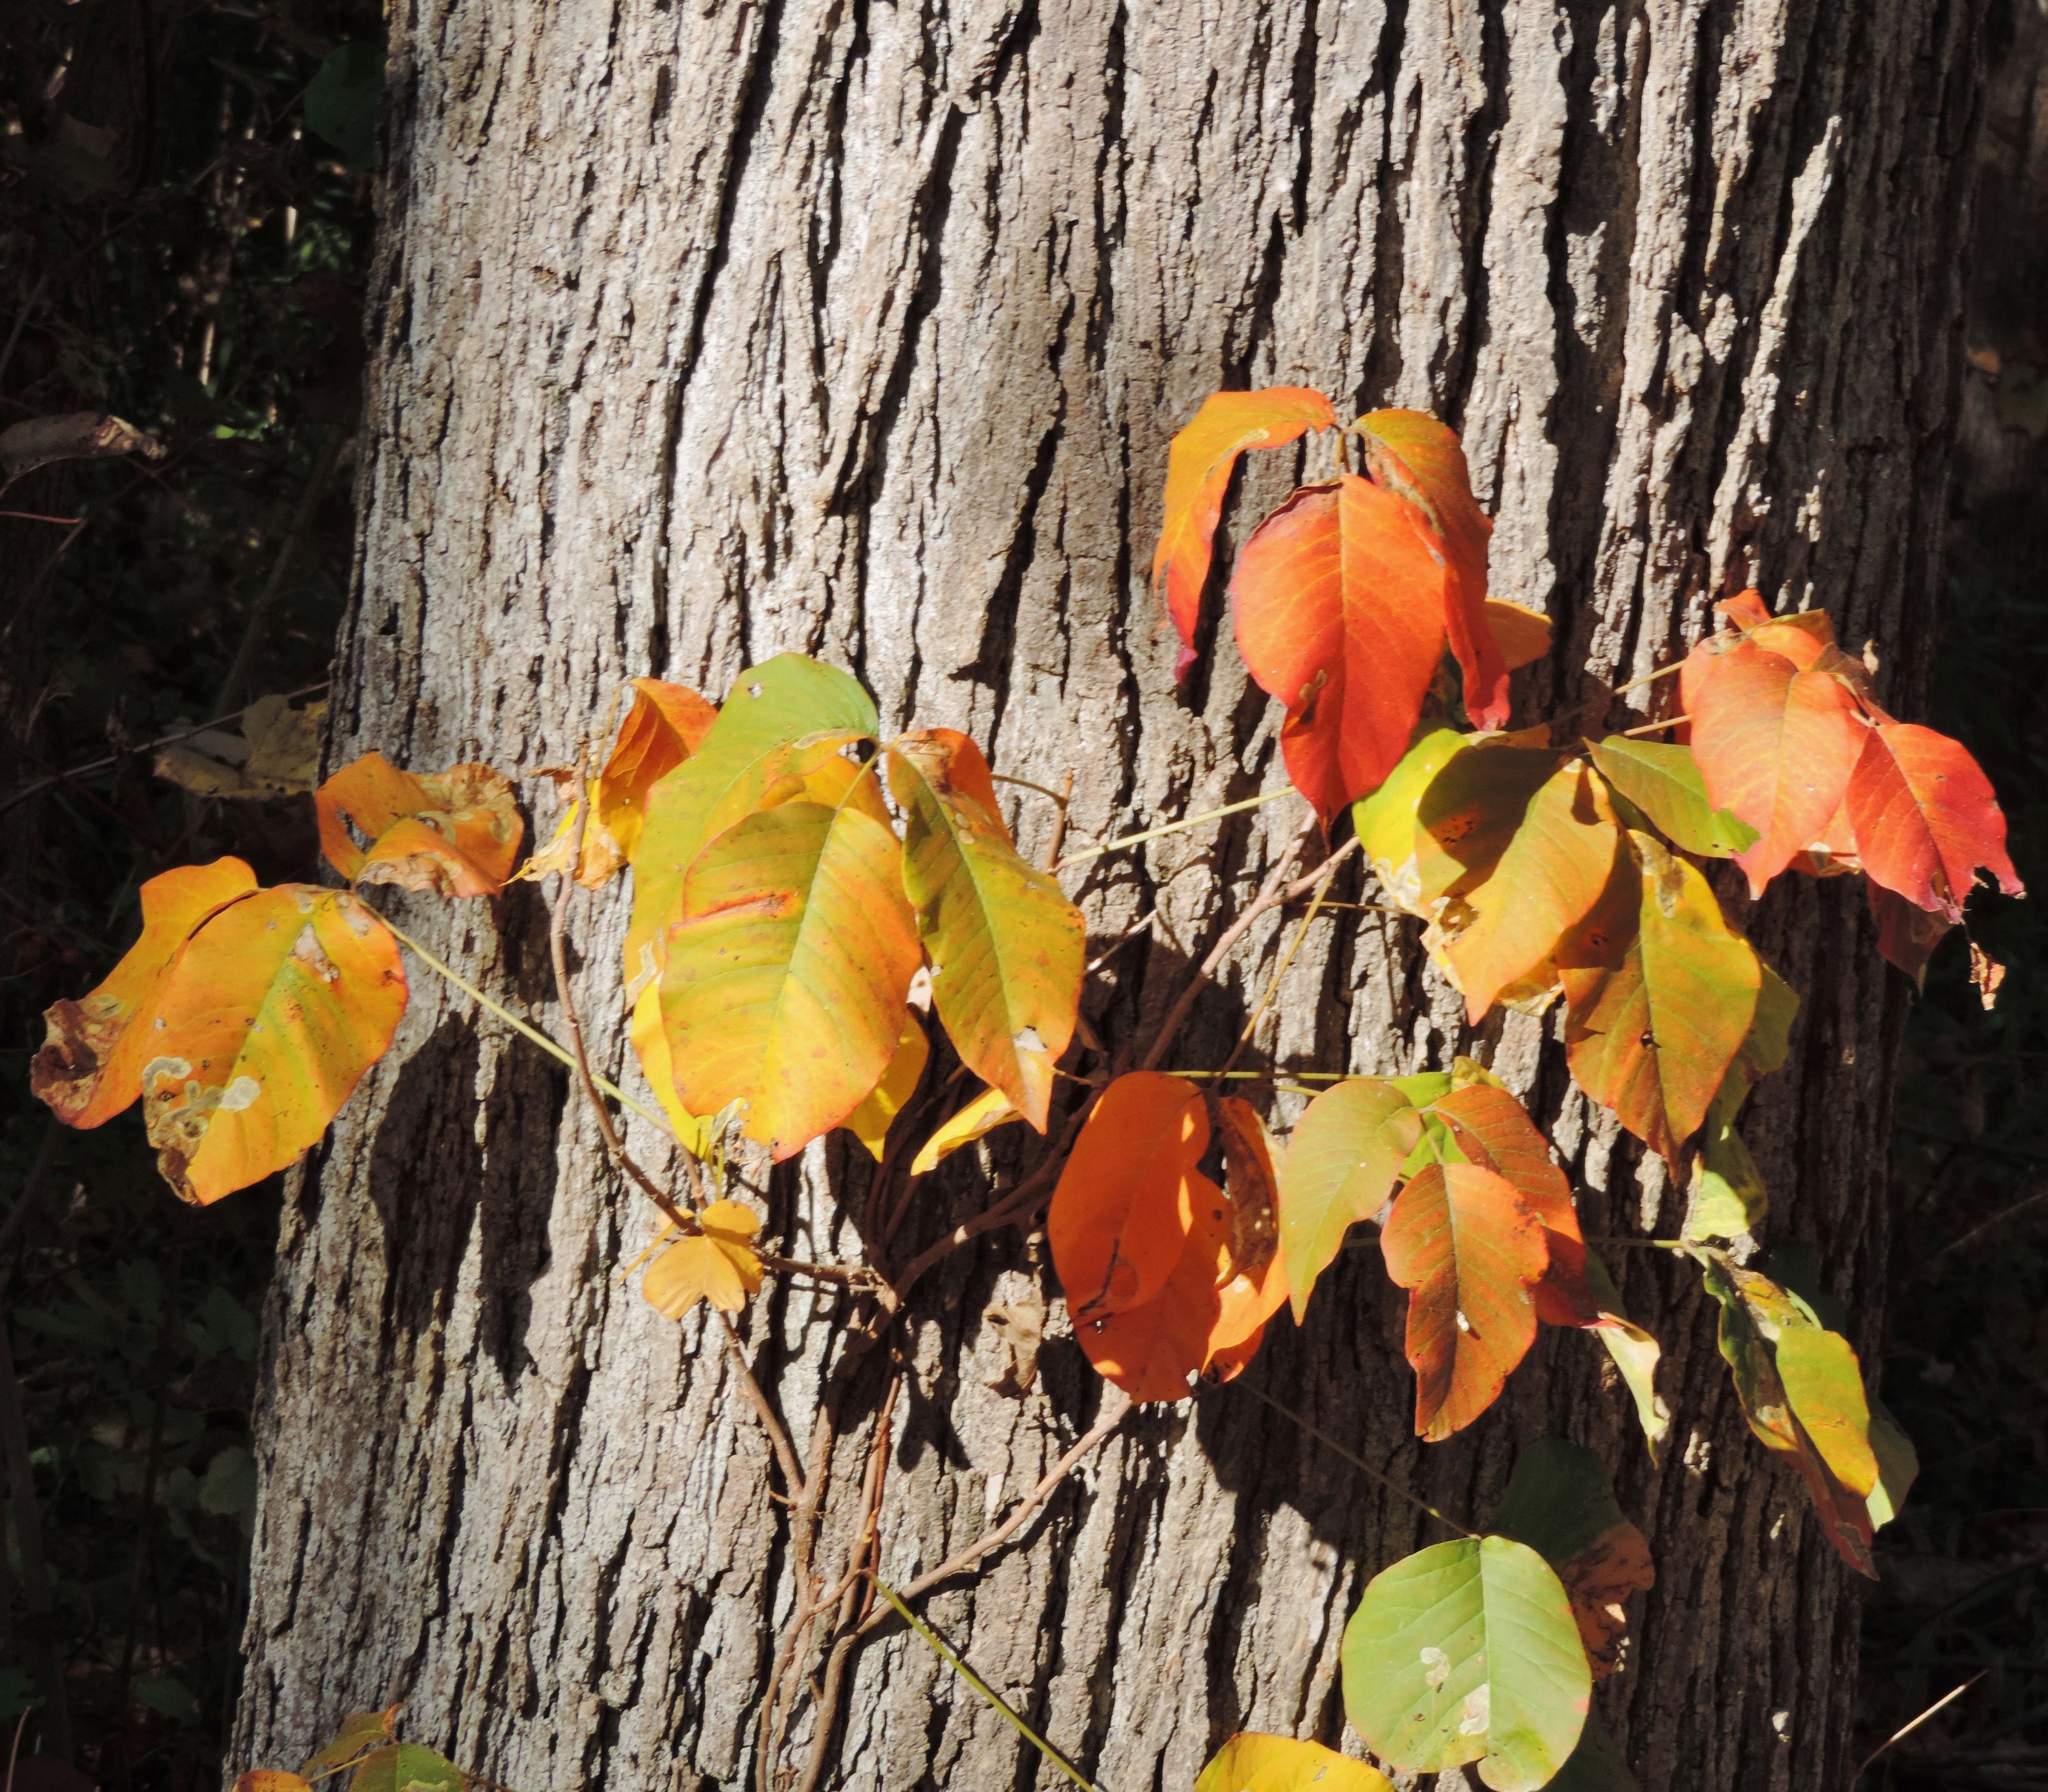 A poison ivy vine with red, orange, yellow, and green leaves wrapped around a thick tree trunk.